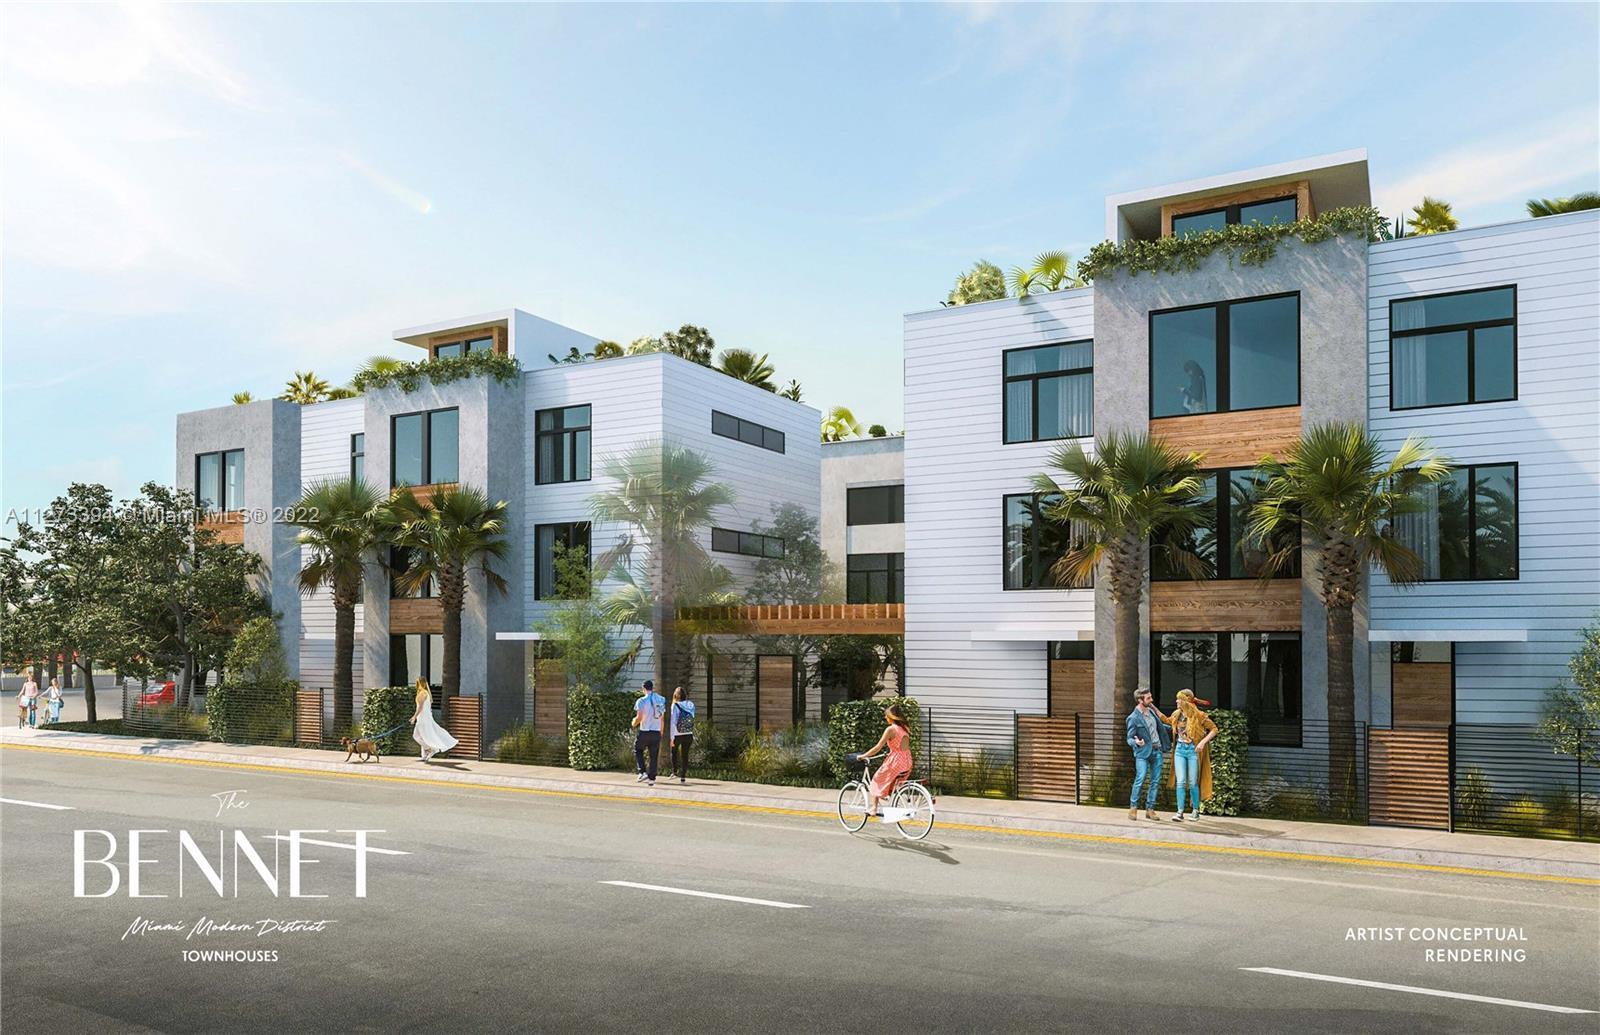 Introducing The Bennet Townhomes at Palm Grove. Fifteen brand new spacious artistic luxe modern town